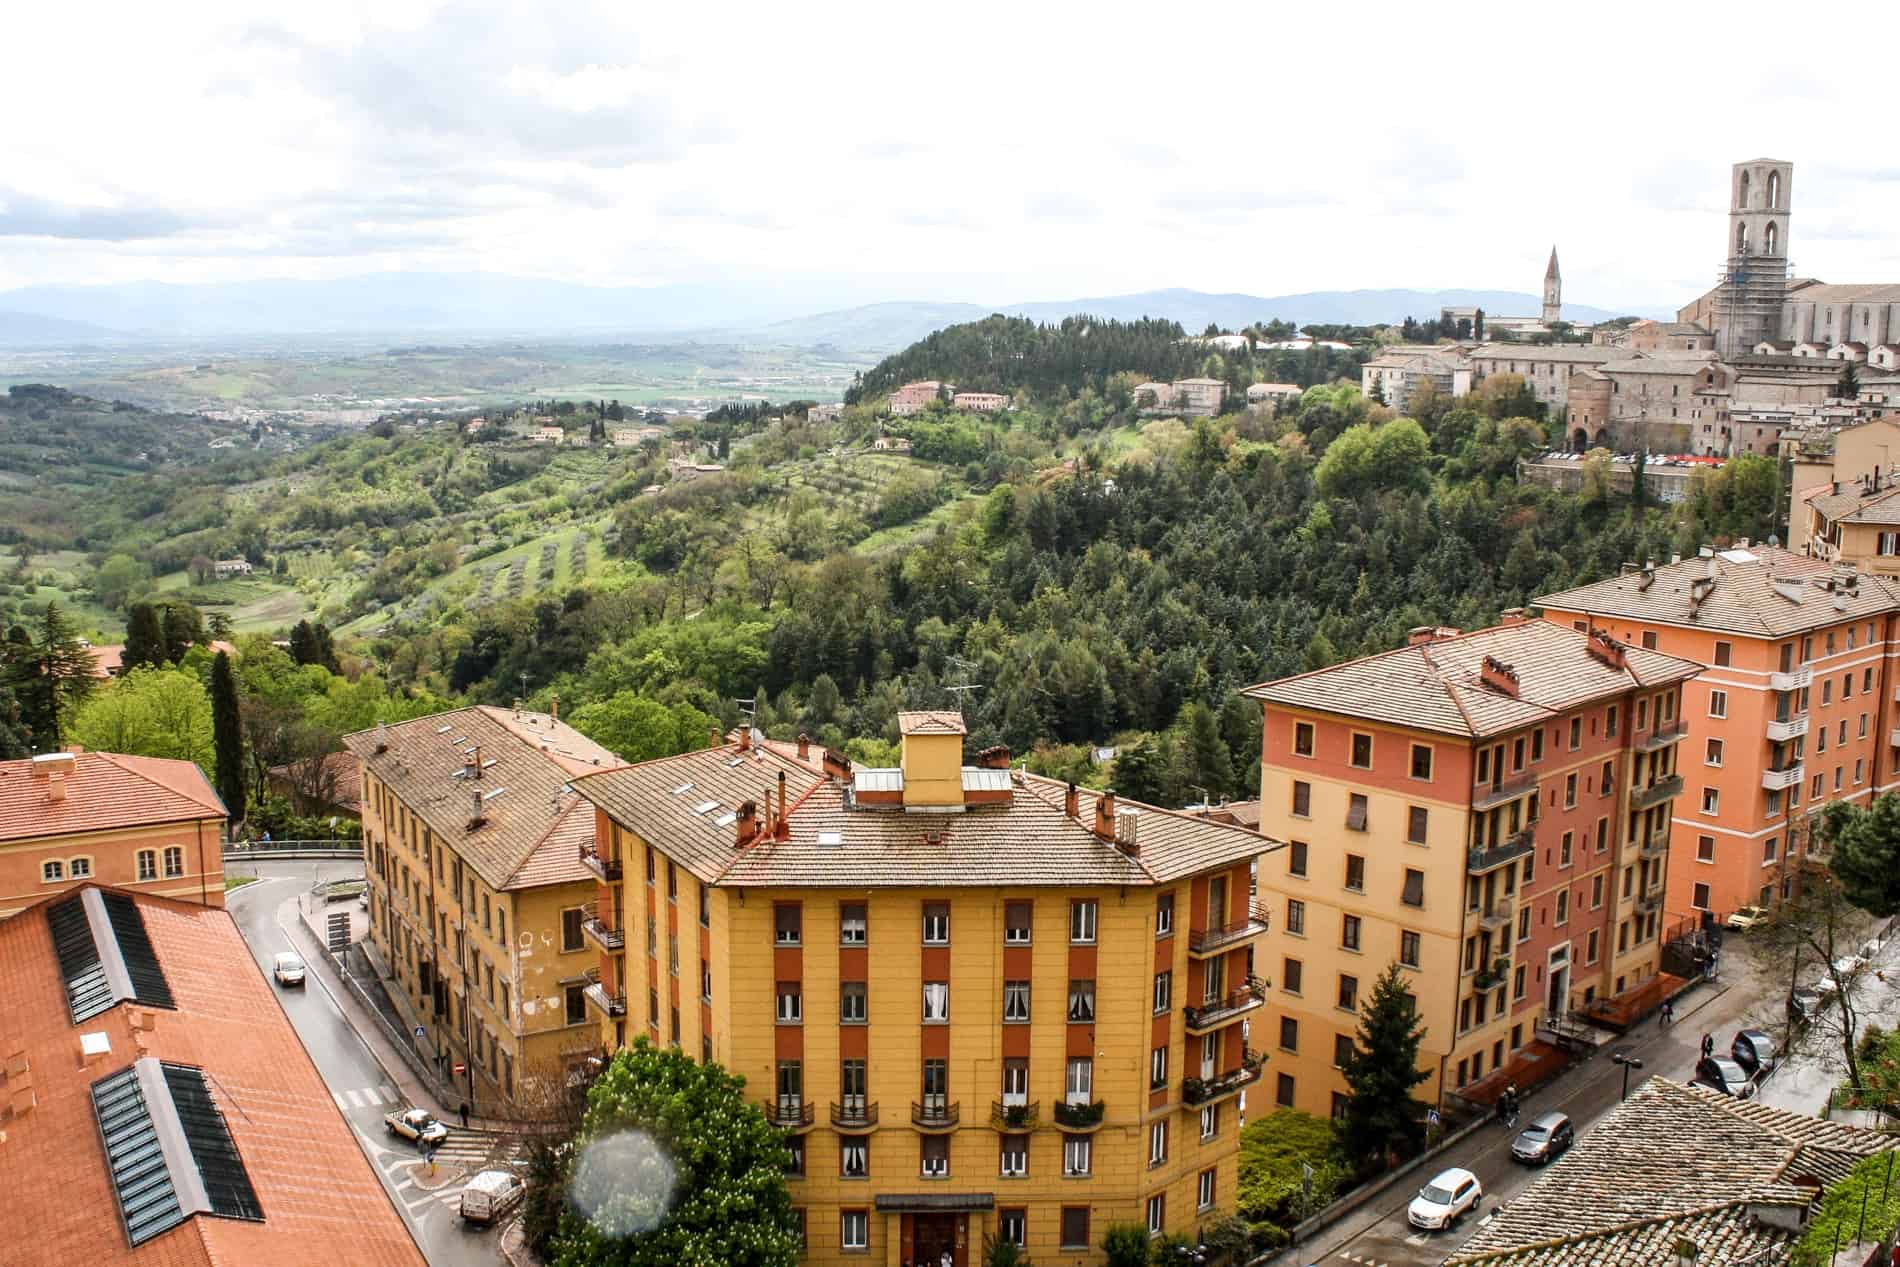 Elevated view of orange and yellow buildings in Perugia city overlooking the rolling hills of the Umbrian countryside. 